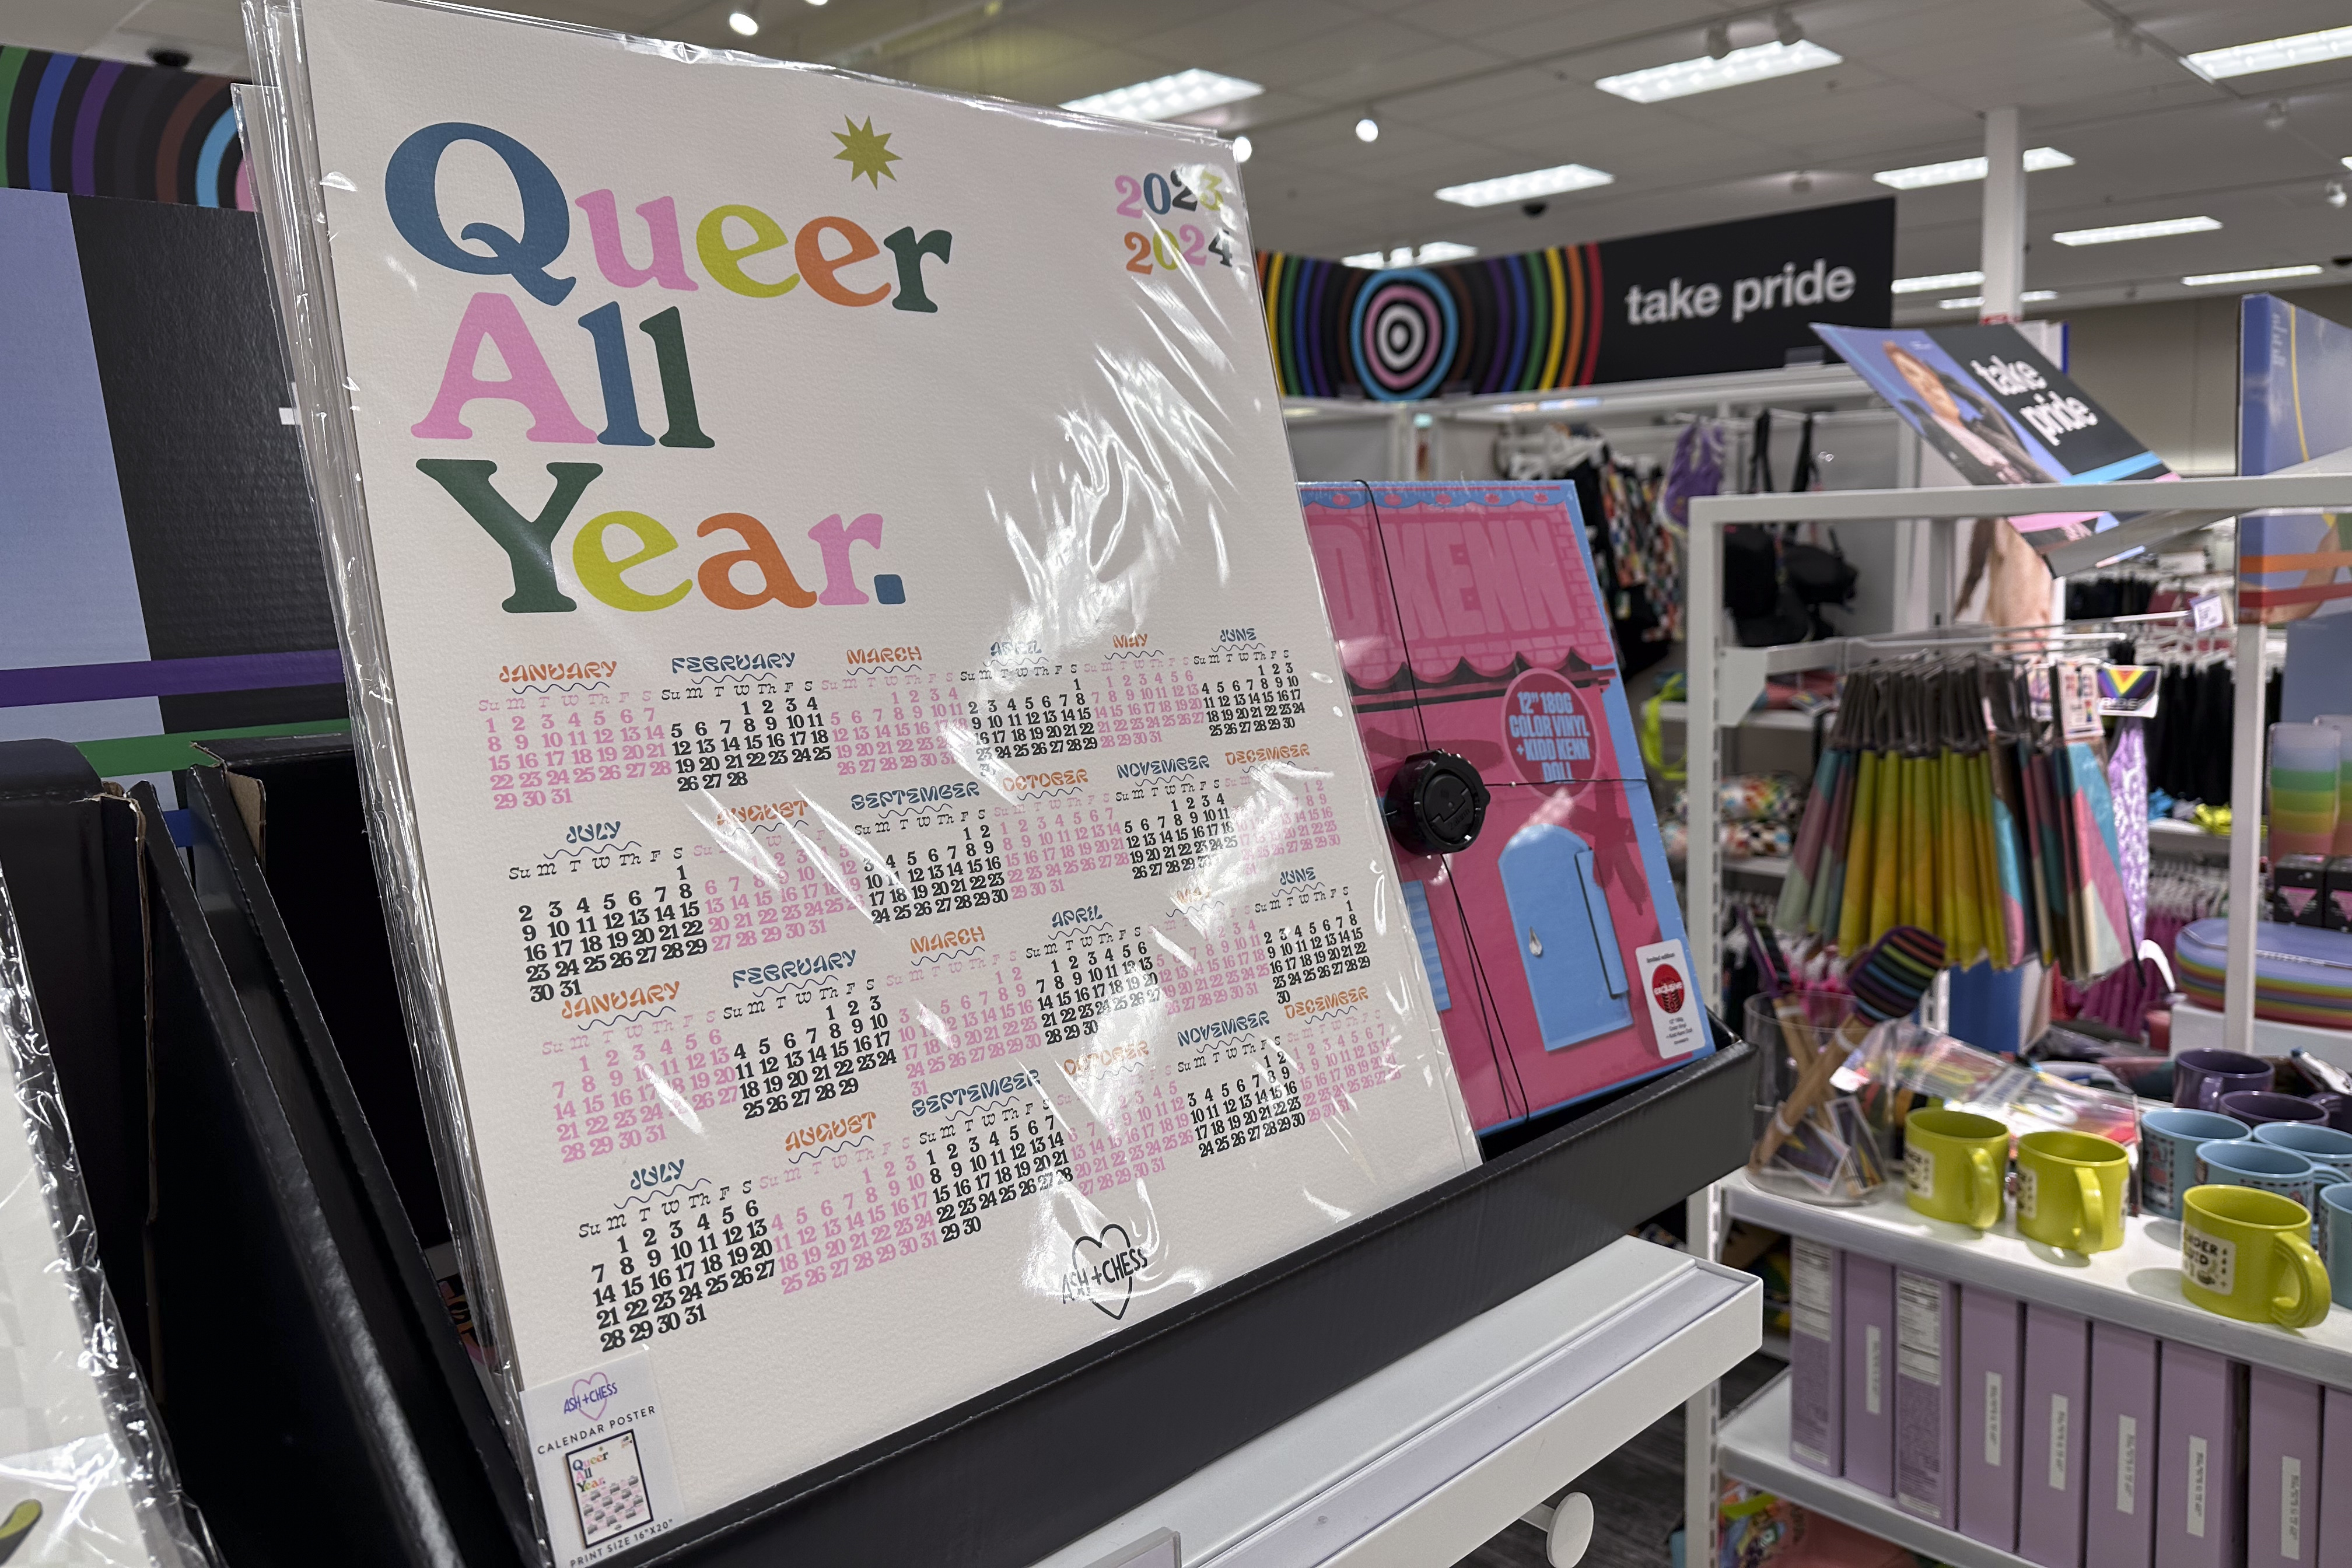 Target Pride Month collection: Some LGBTQ+ products pulled over